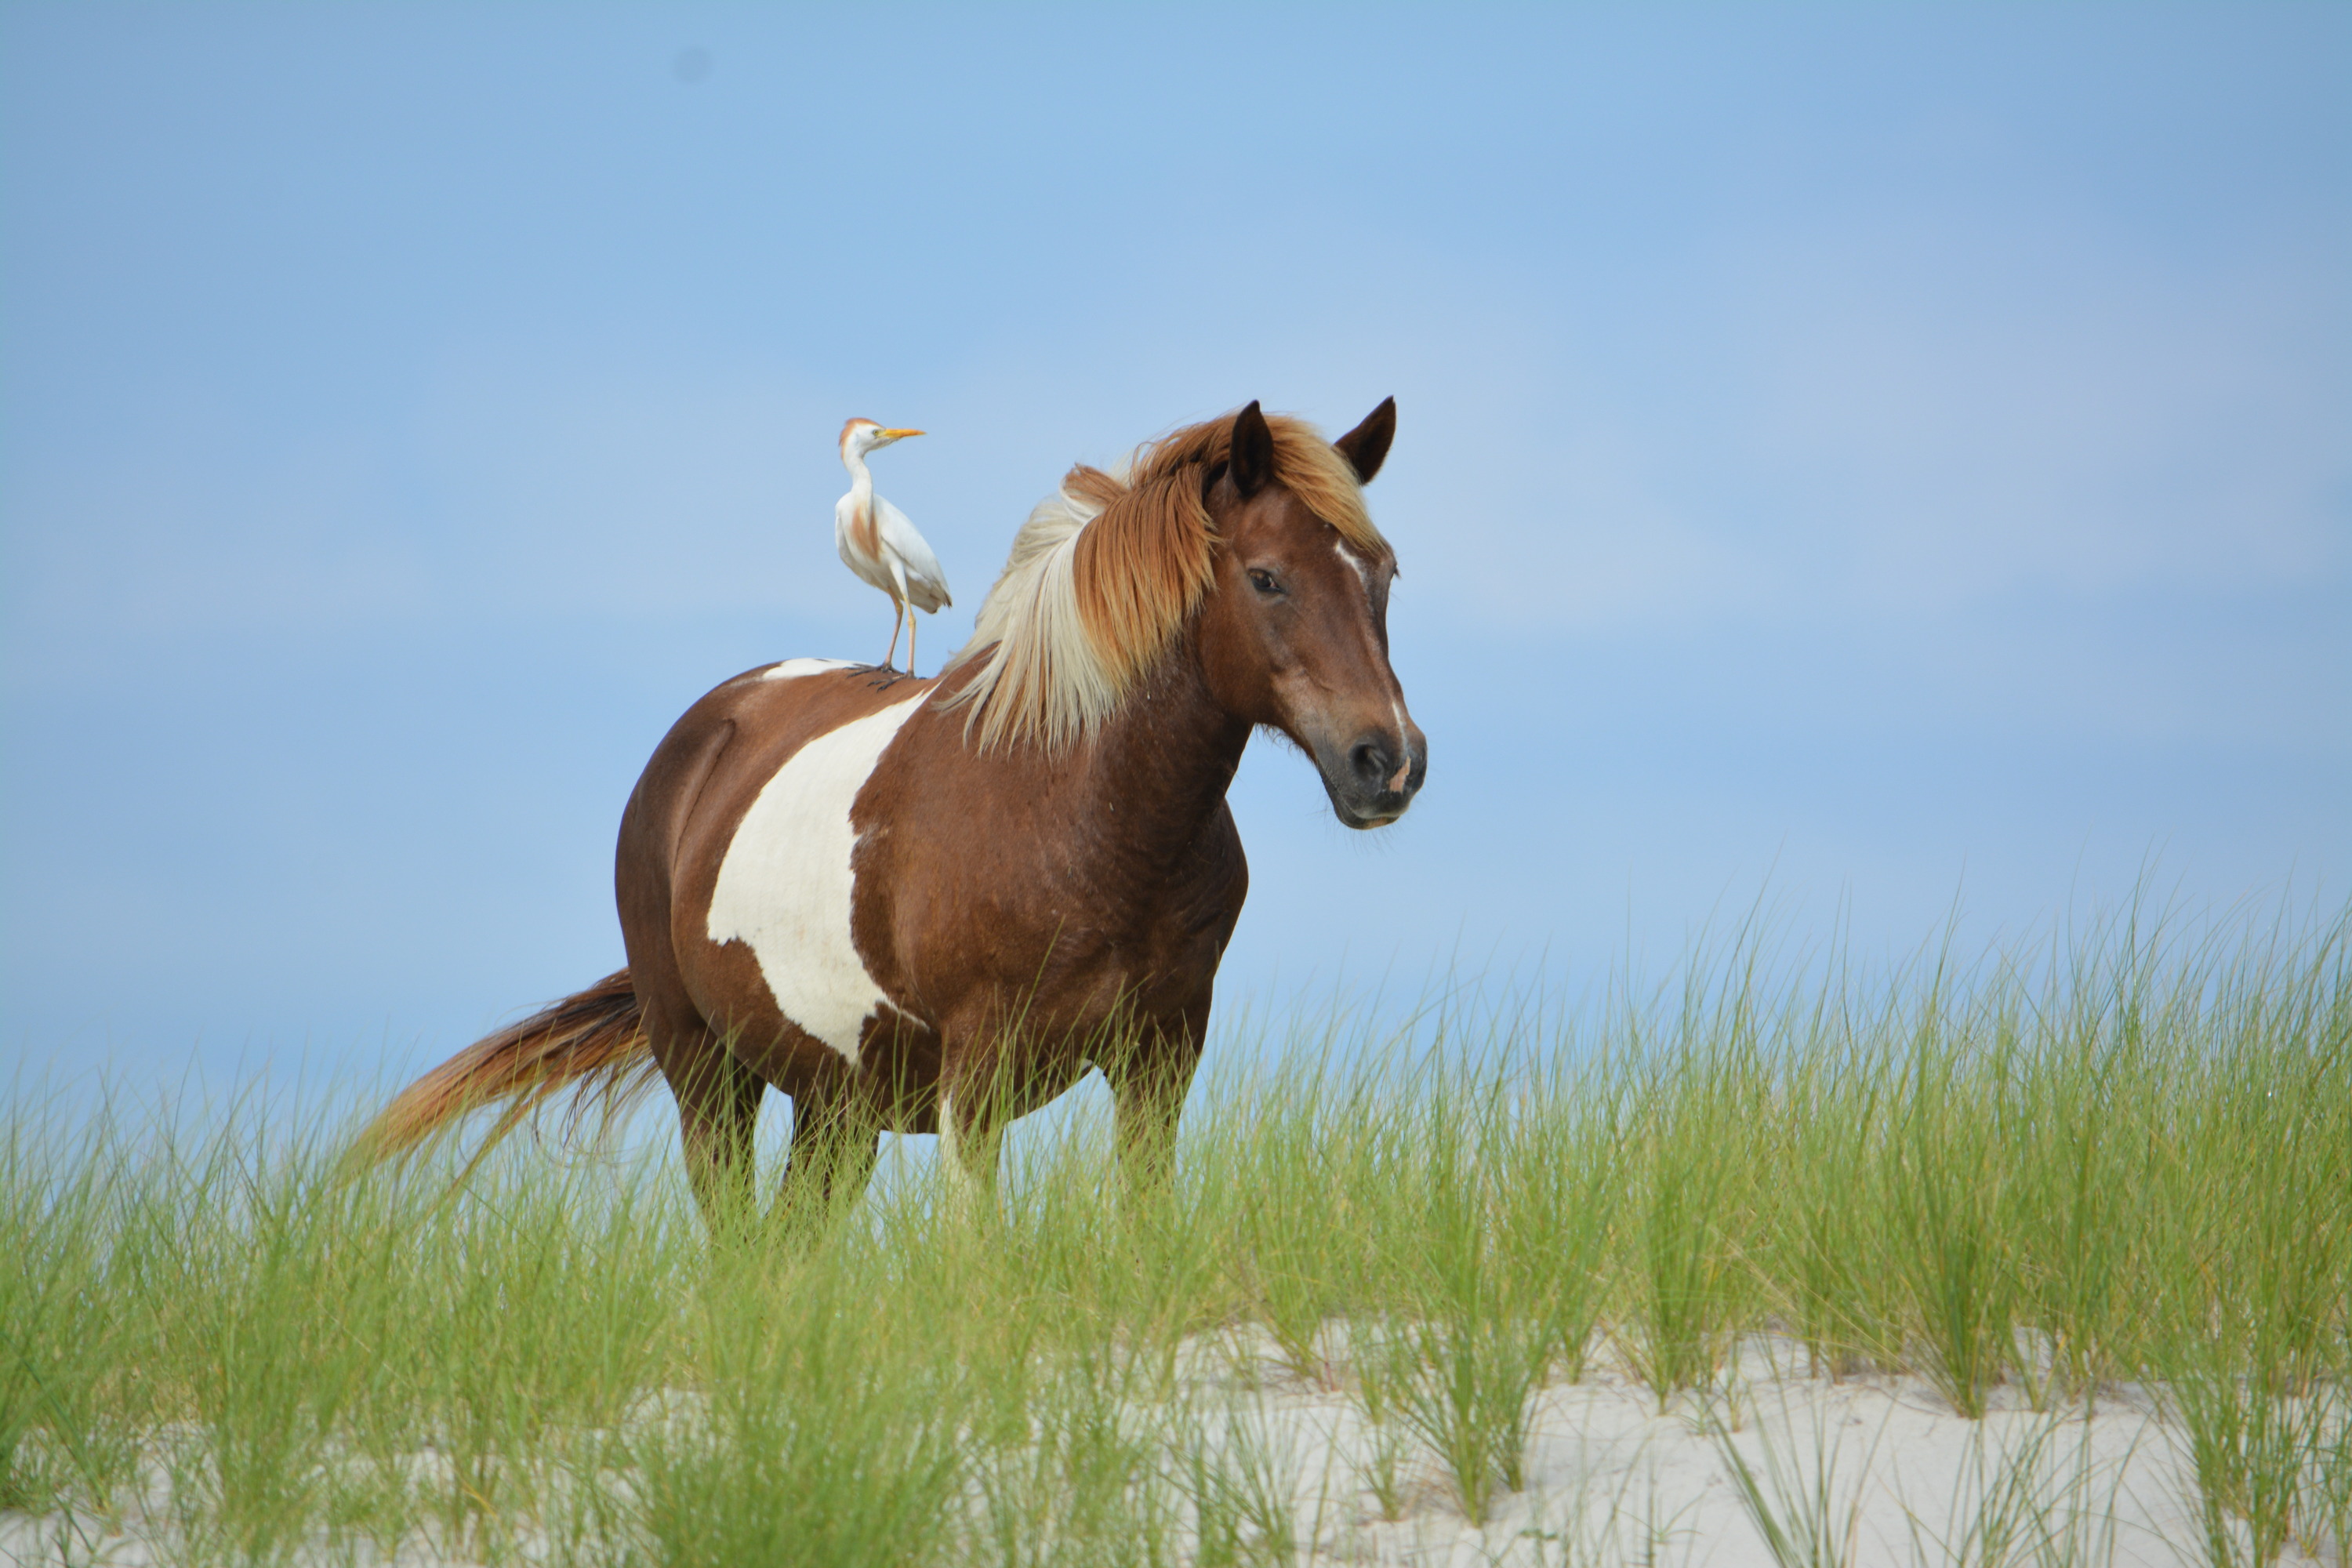 Horse with cattle egret perched on its back, standing on top of dune 